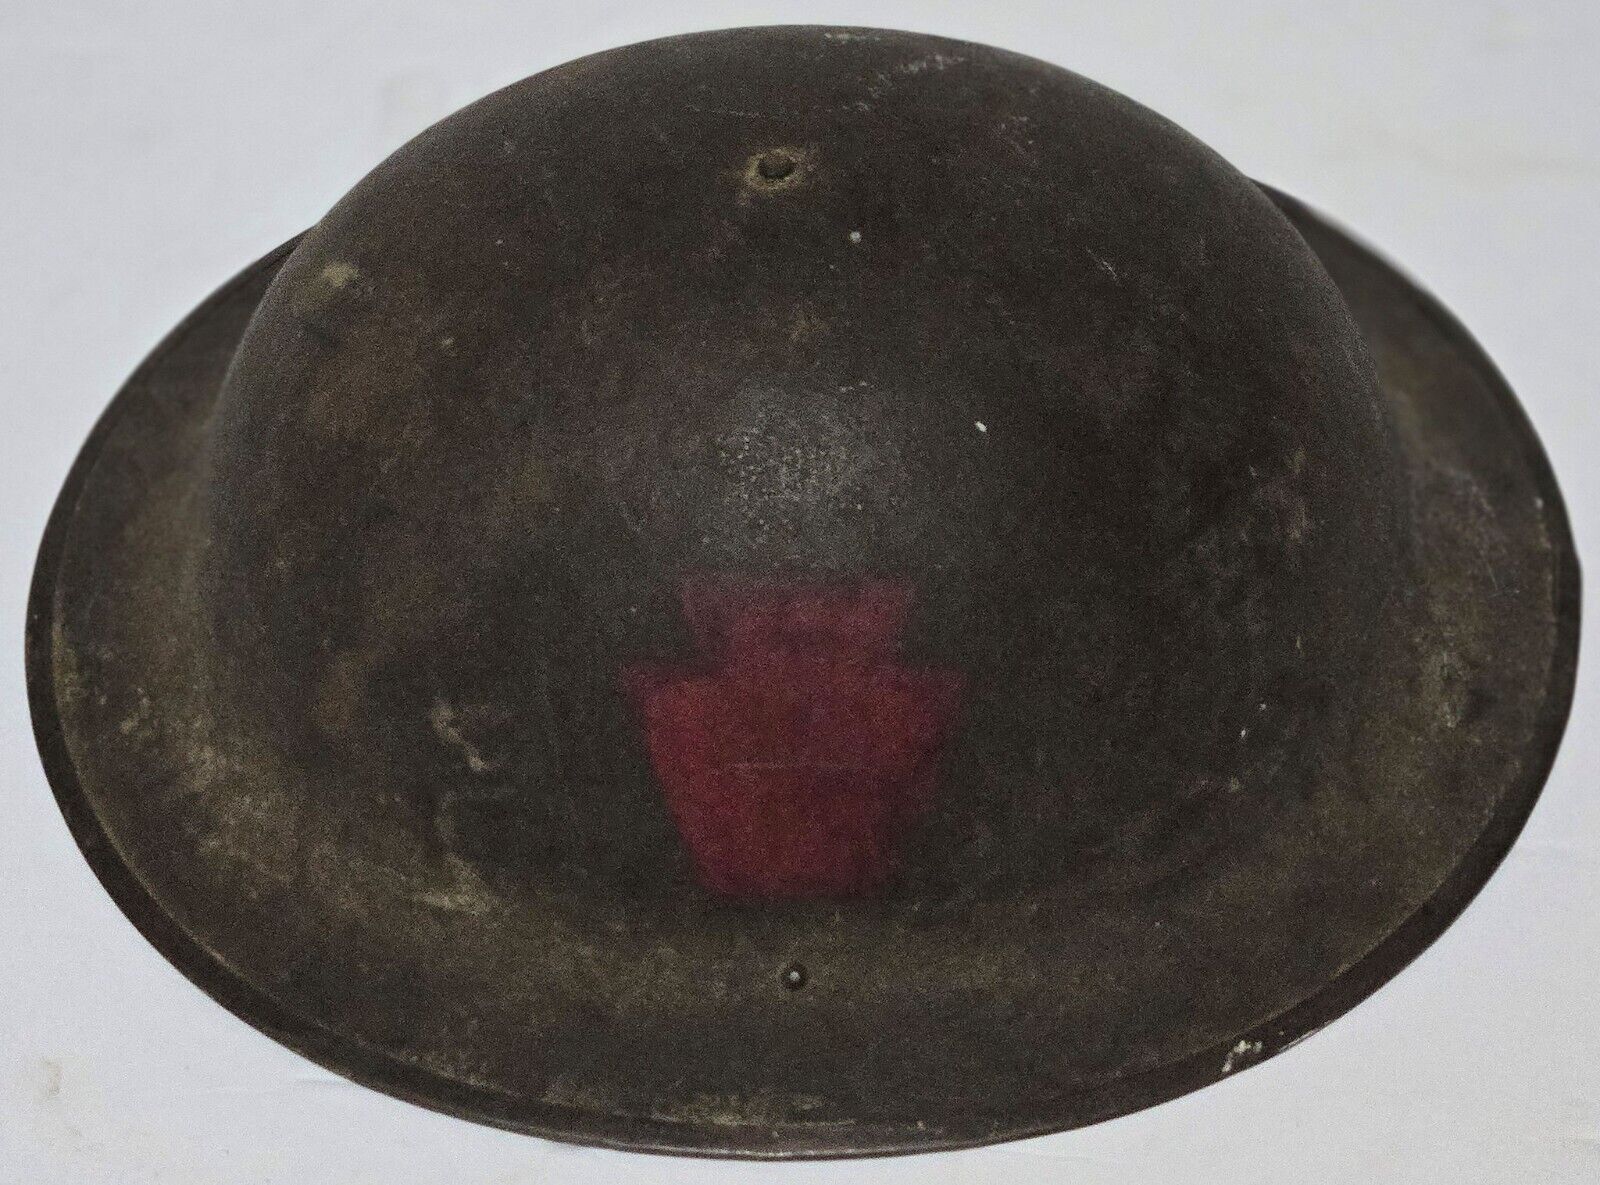 Original 1917 WWI 28th Division Allied Expeditionary Forces World War I Helmet